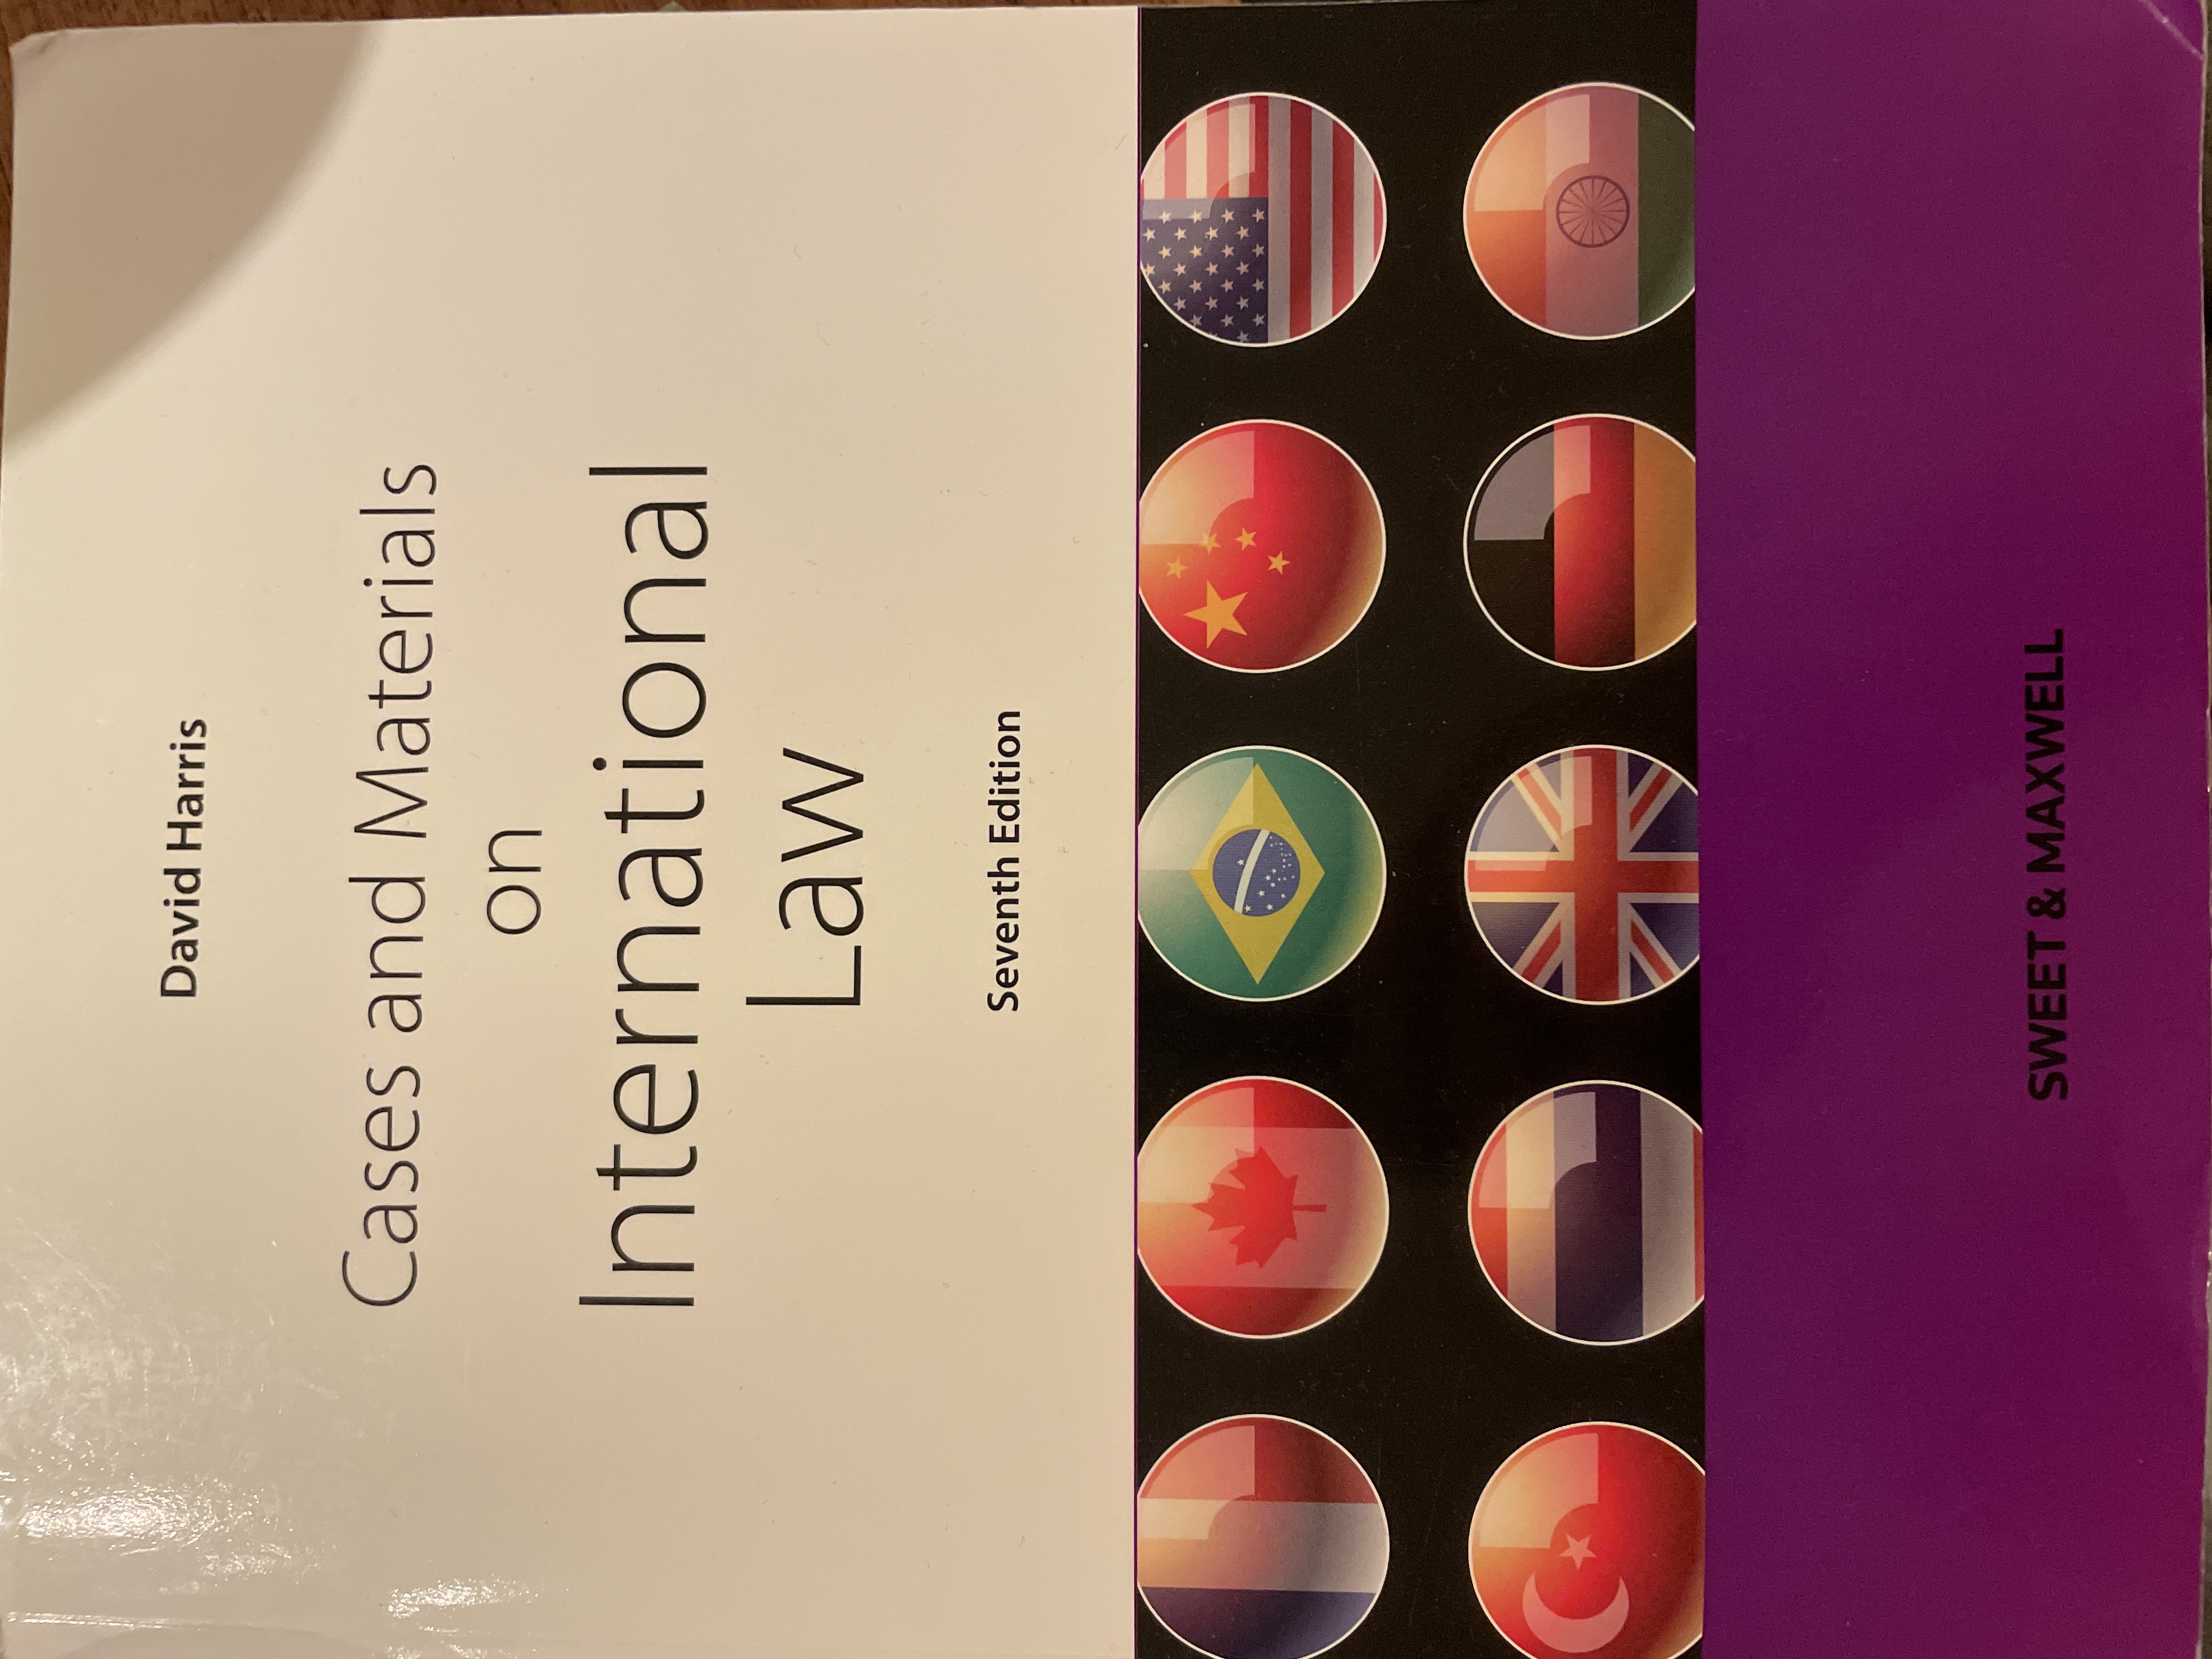 Cases and Materials on International Law; D J Harris; 2010